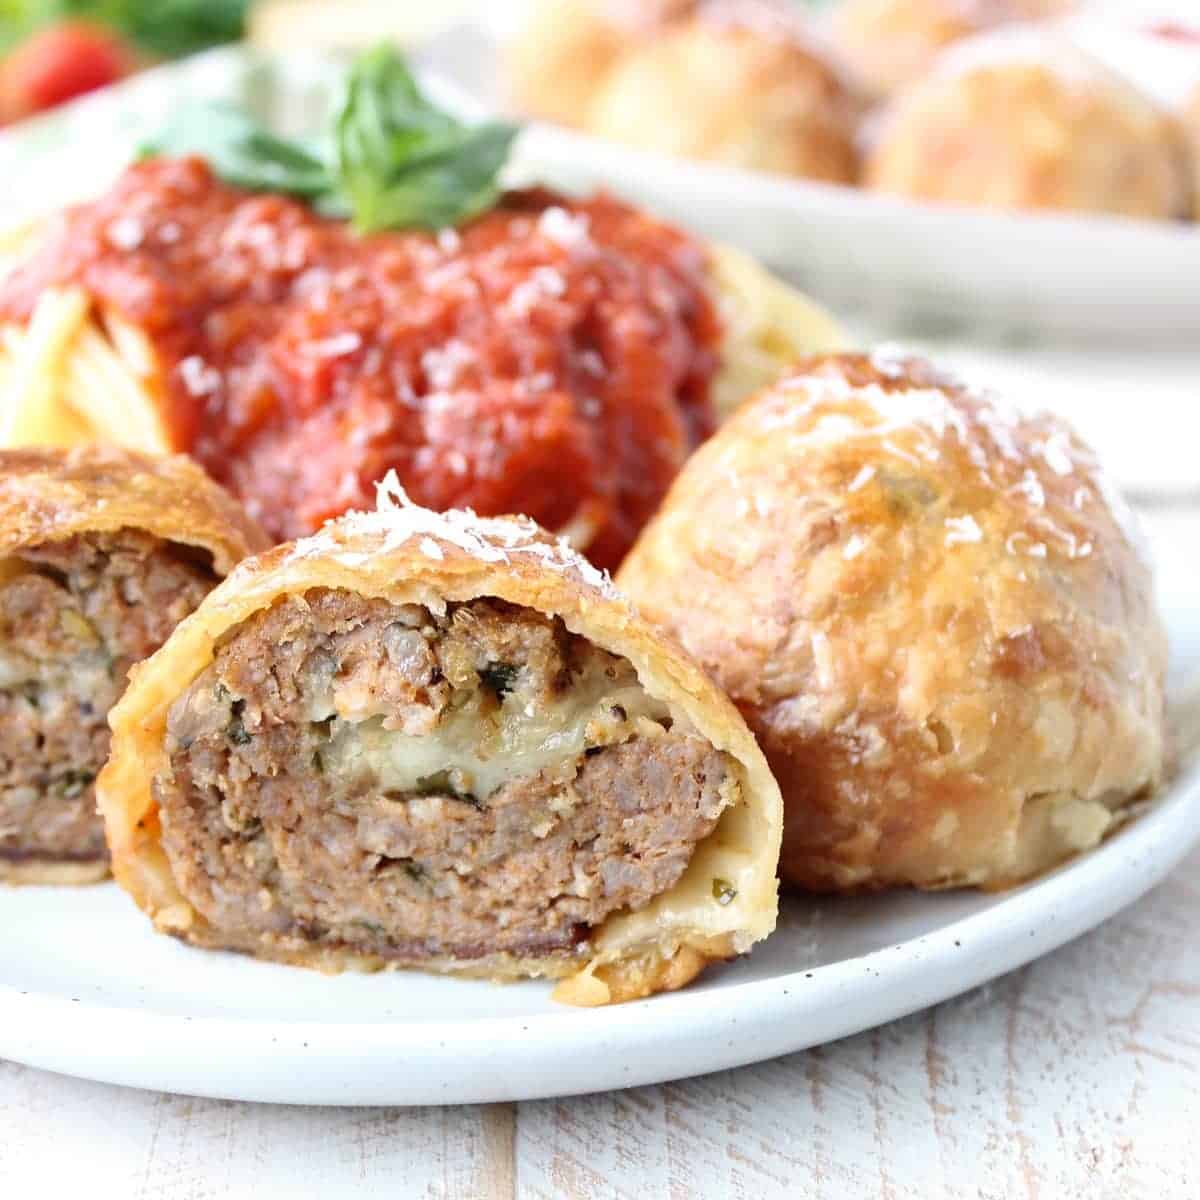 baked puff pastry wrapped meatball cut in half on plate with spaghetti and red sauce